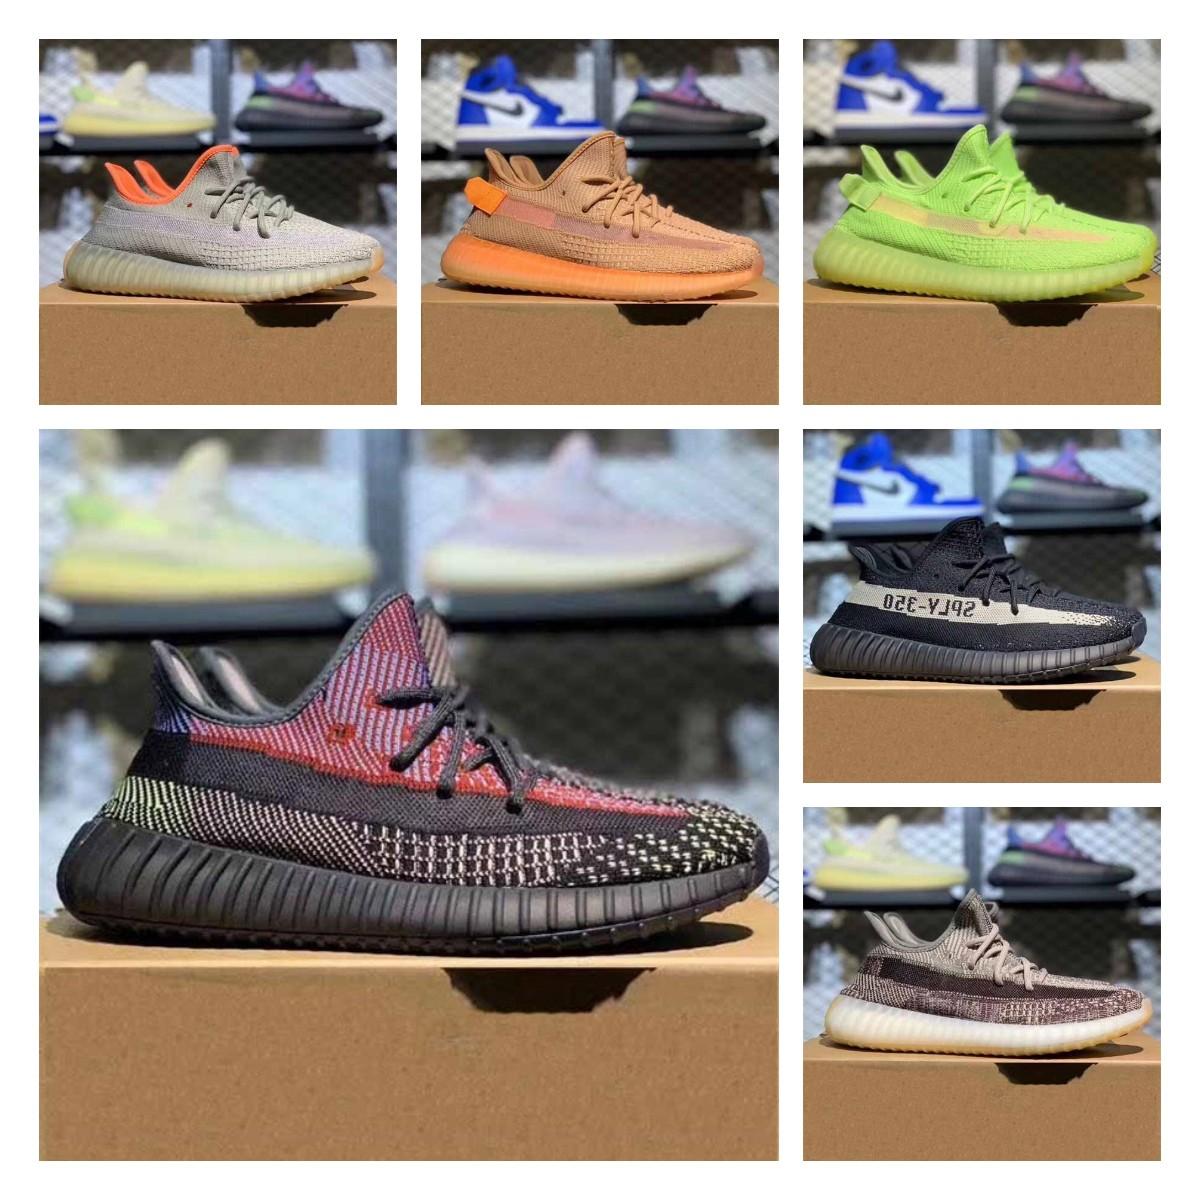 

yezzy v2 kanye mono men West women casual shoes trainers Carbon Zebra Static black Yecheil Reflective Beluga Natural outdoor sneakers yeezys 350 3M foam nikes, 29